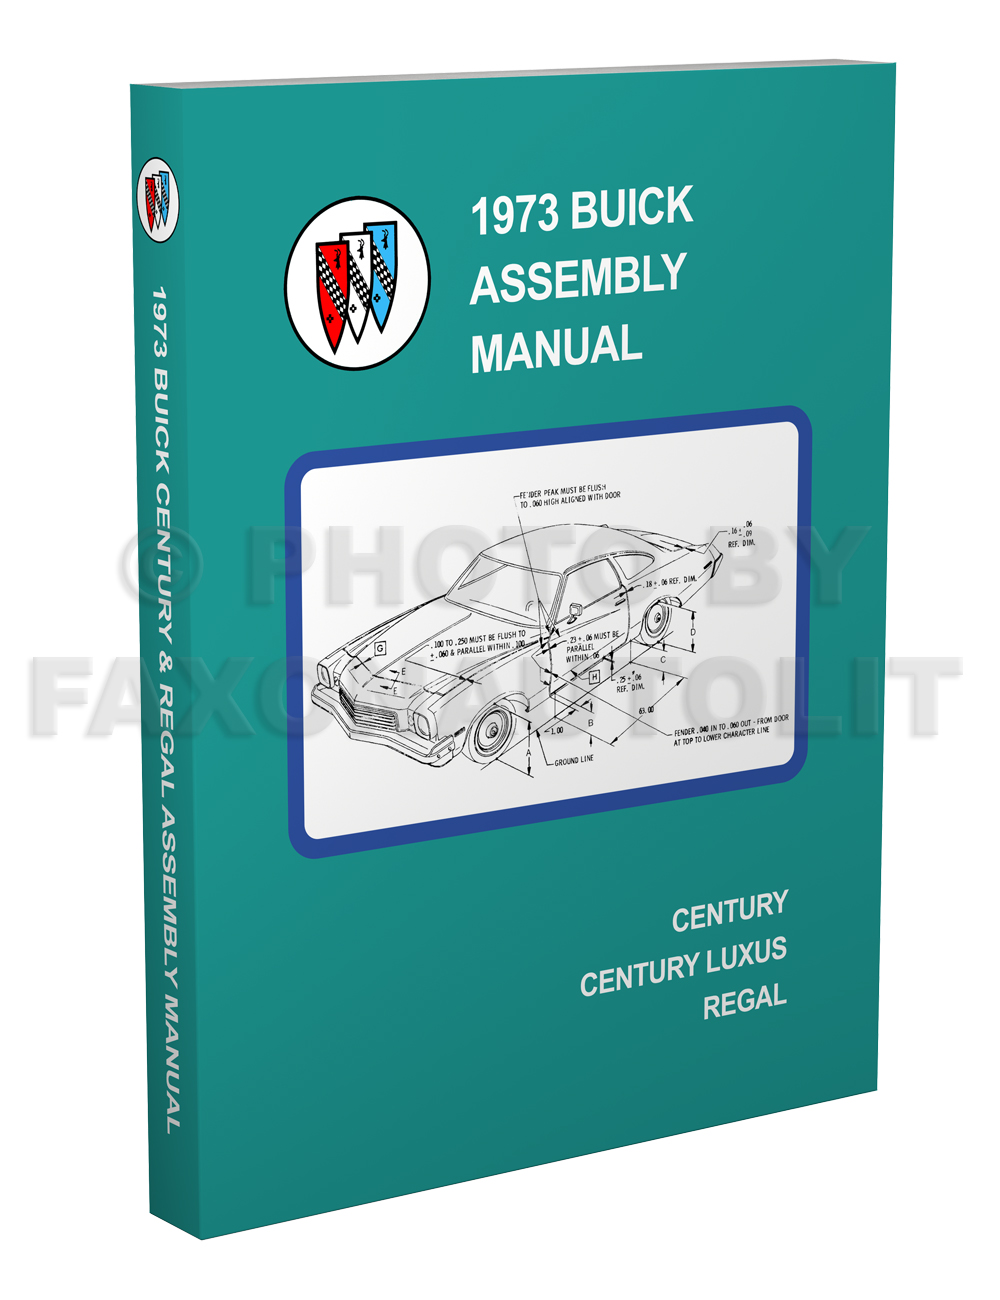 1973 Buick Factory Assembly Manual Reprint Century and Regal